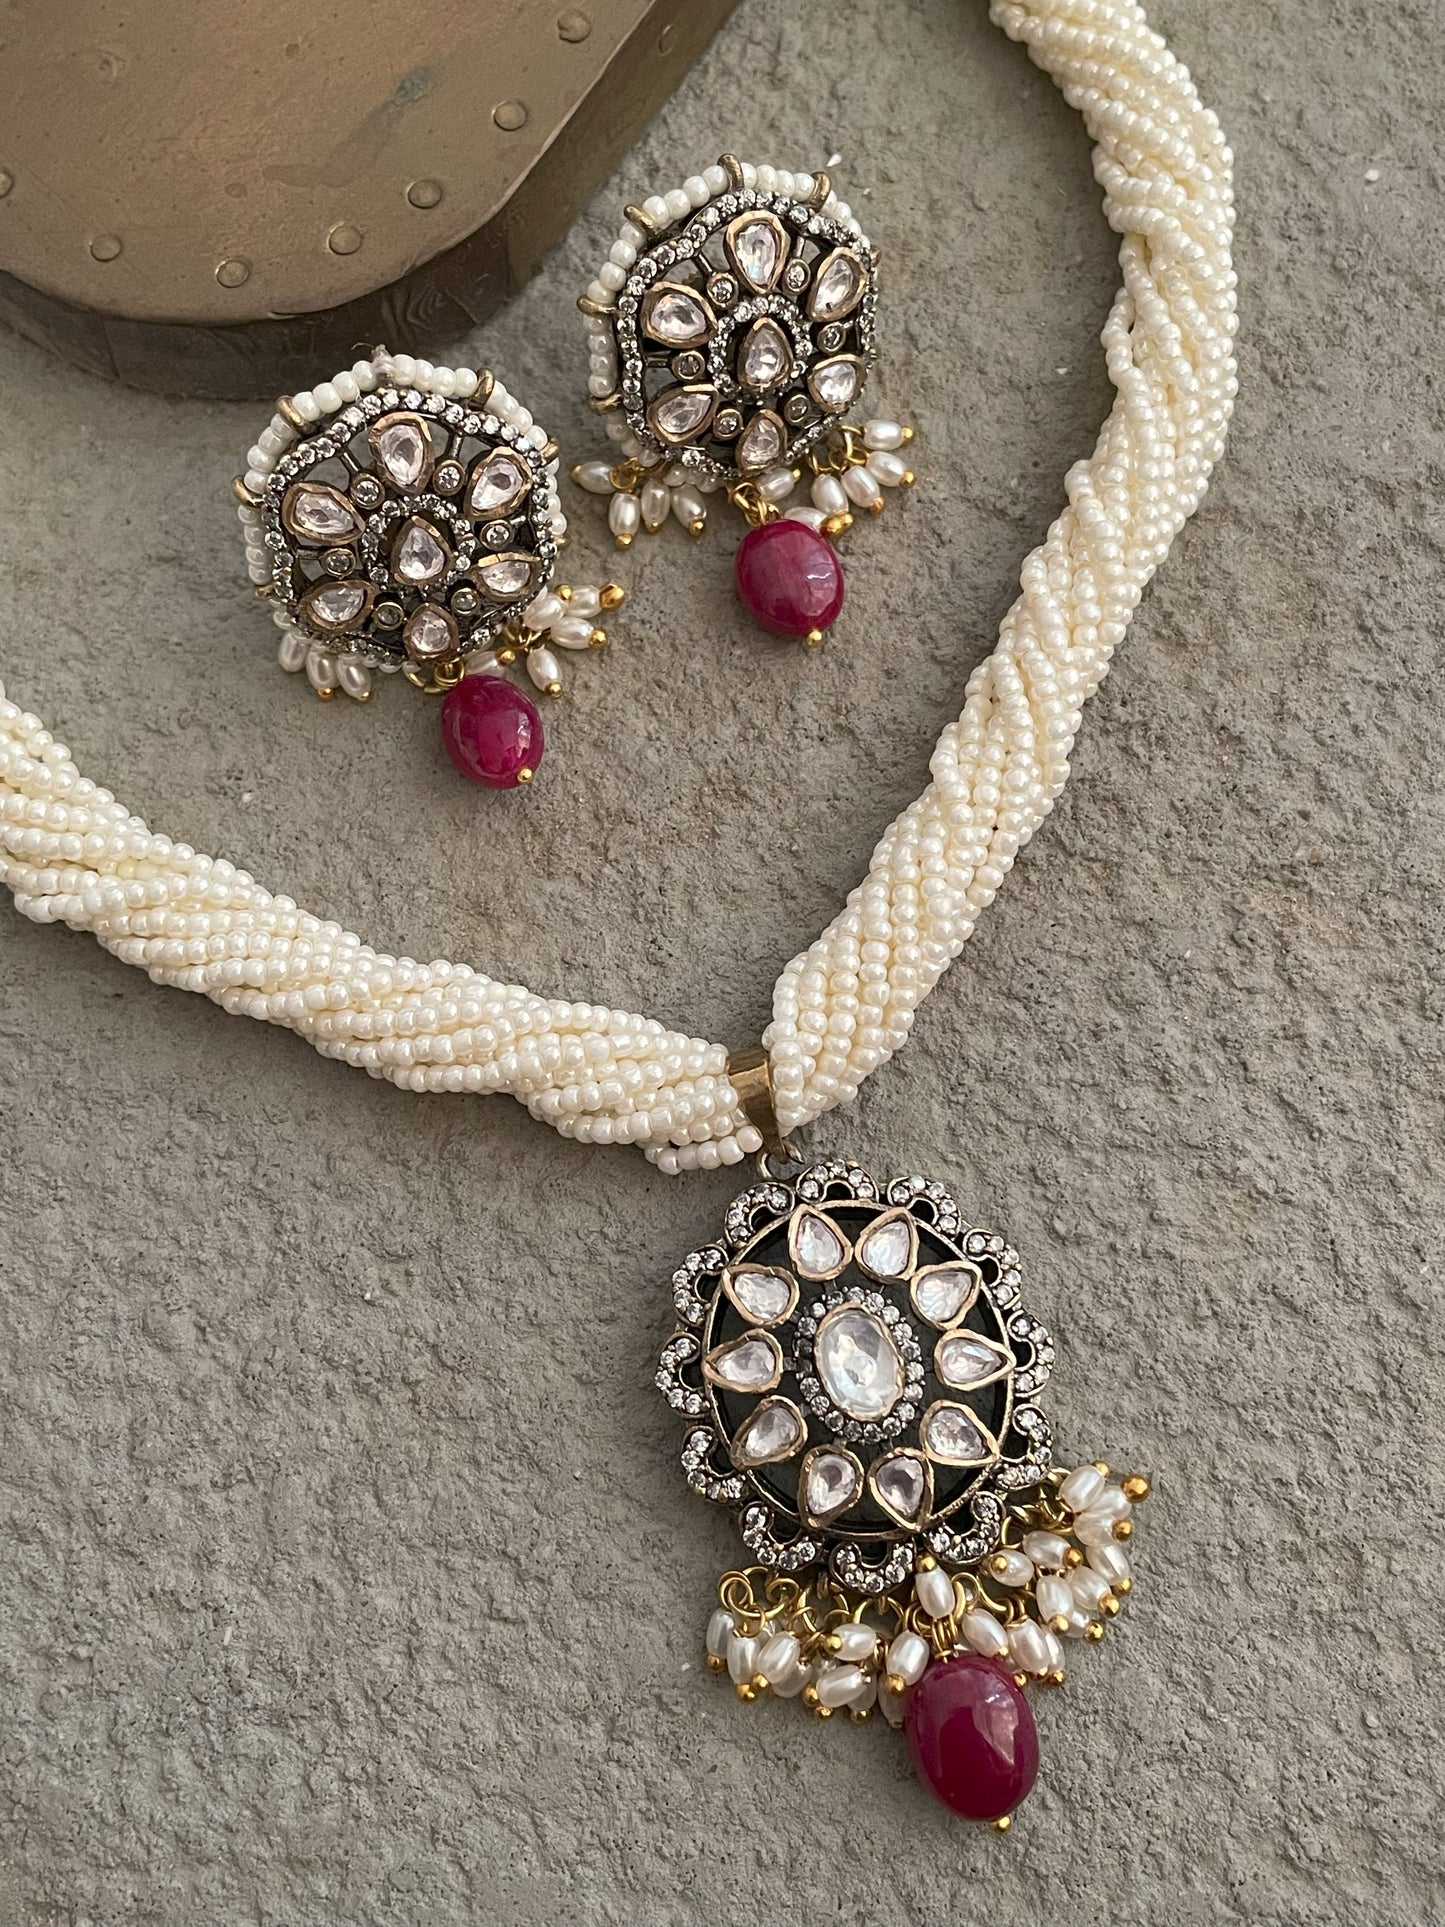 Rupni Victorian Necklace Set with Real Ruby Drops